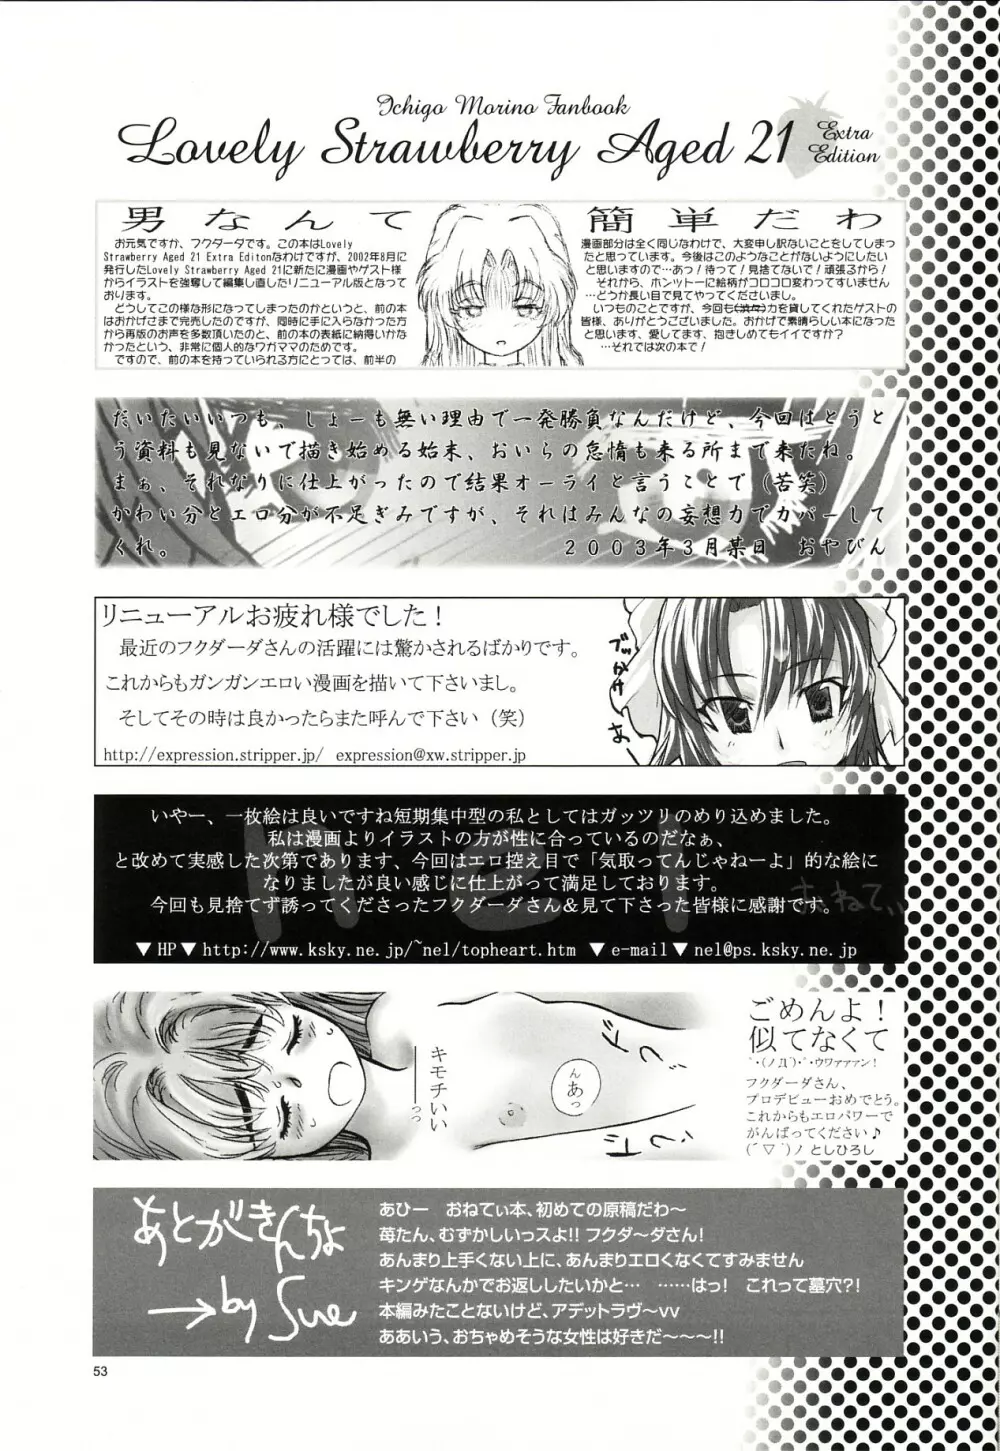 Lovely Strawberry Aged 21 Extra Edition Page.52